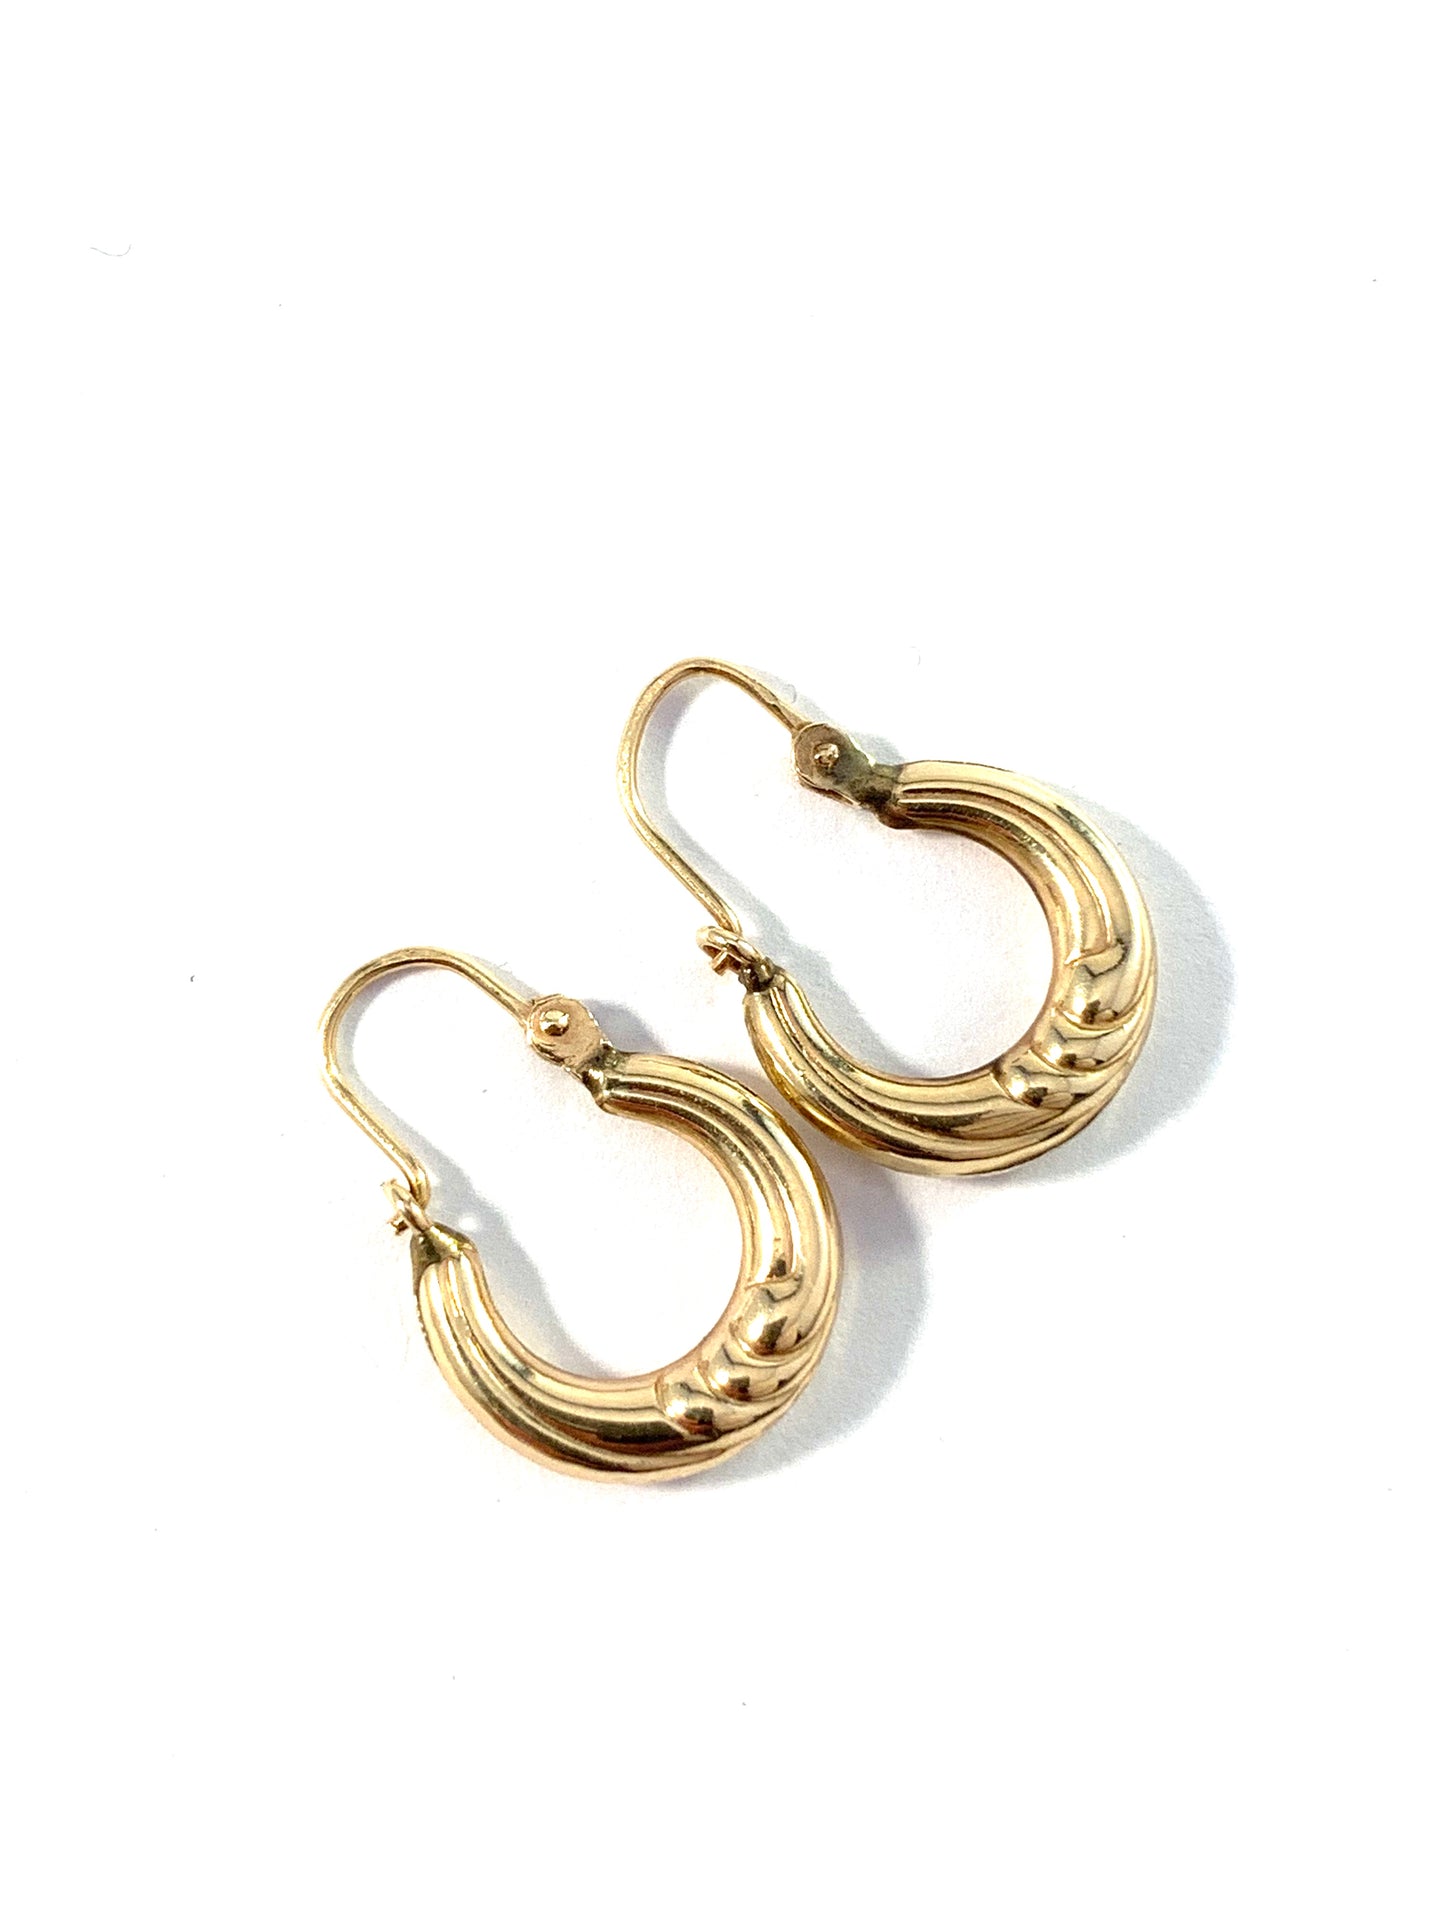 Vintage Mid Century 14k Gold Hollow Earrings. Possibly Austria.